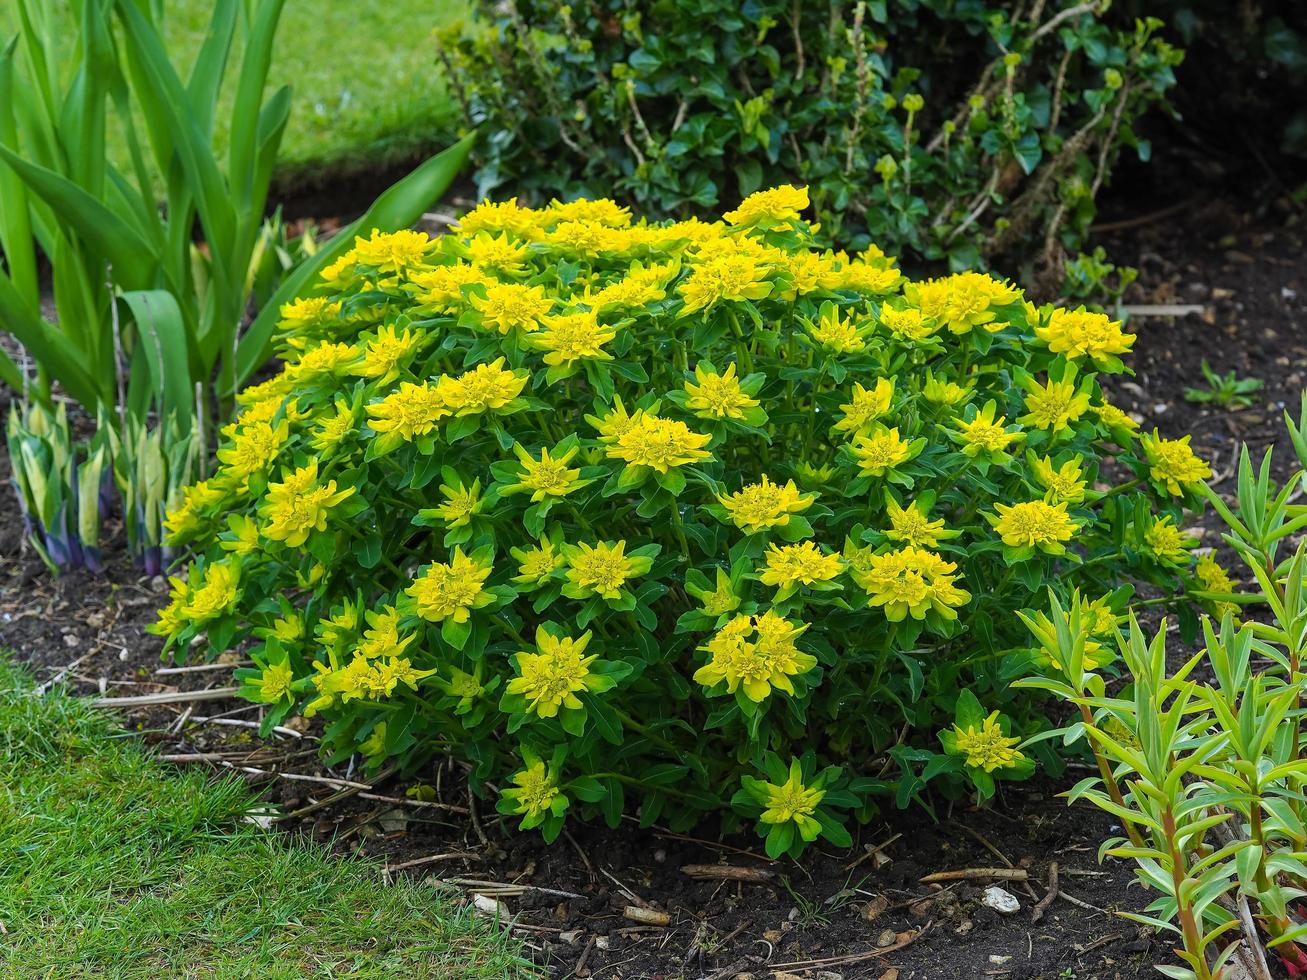 Compact yellow Euphorbia plant flowering in a garden photo